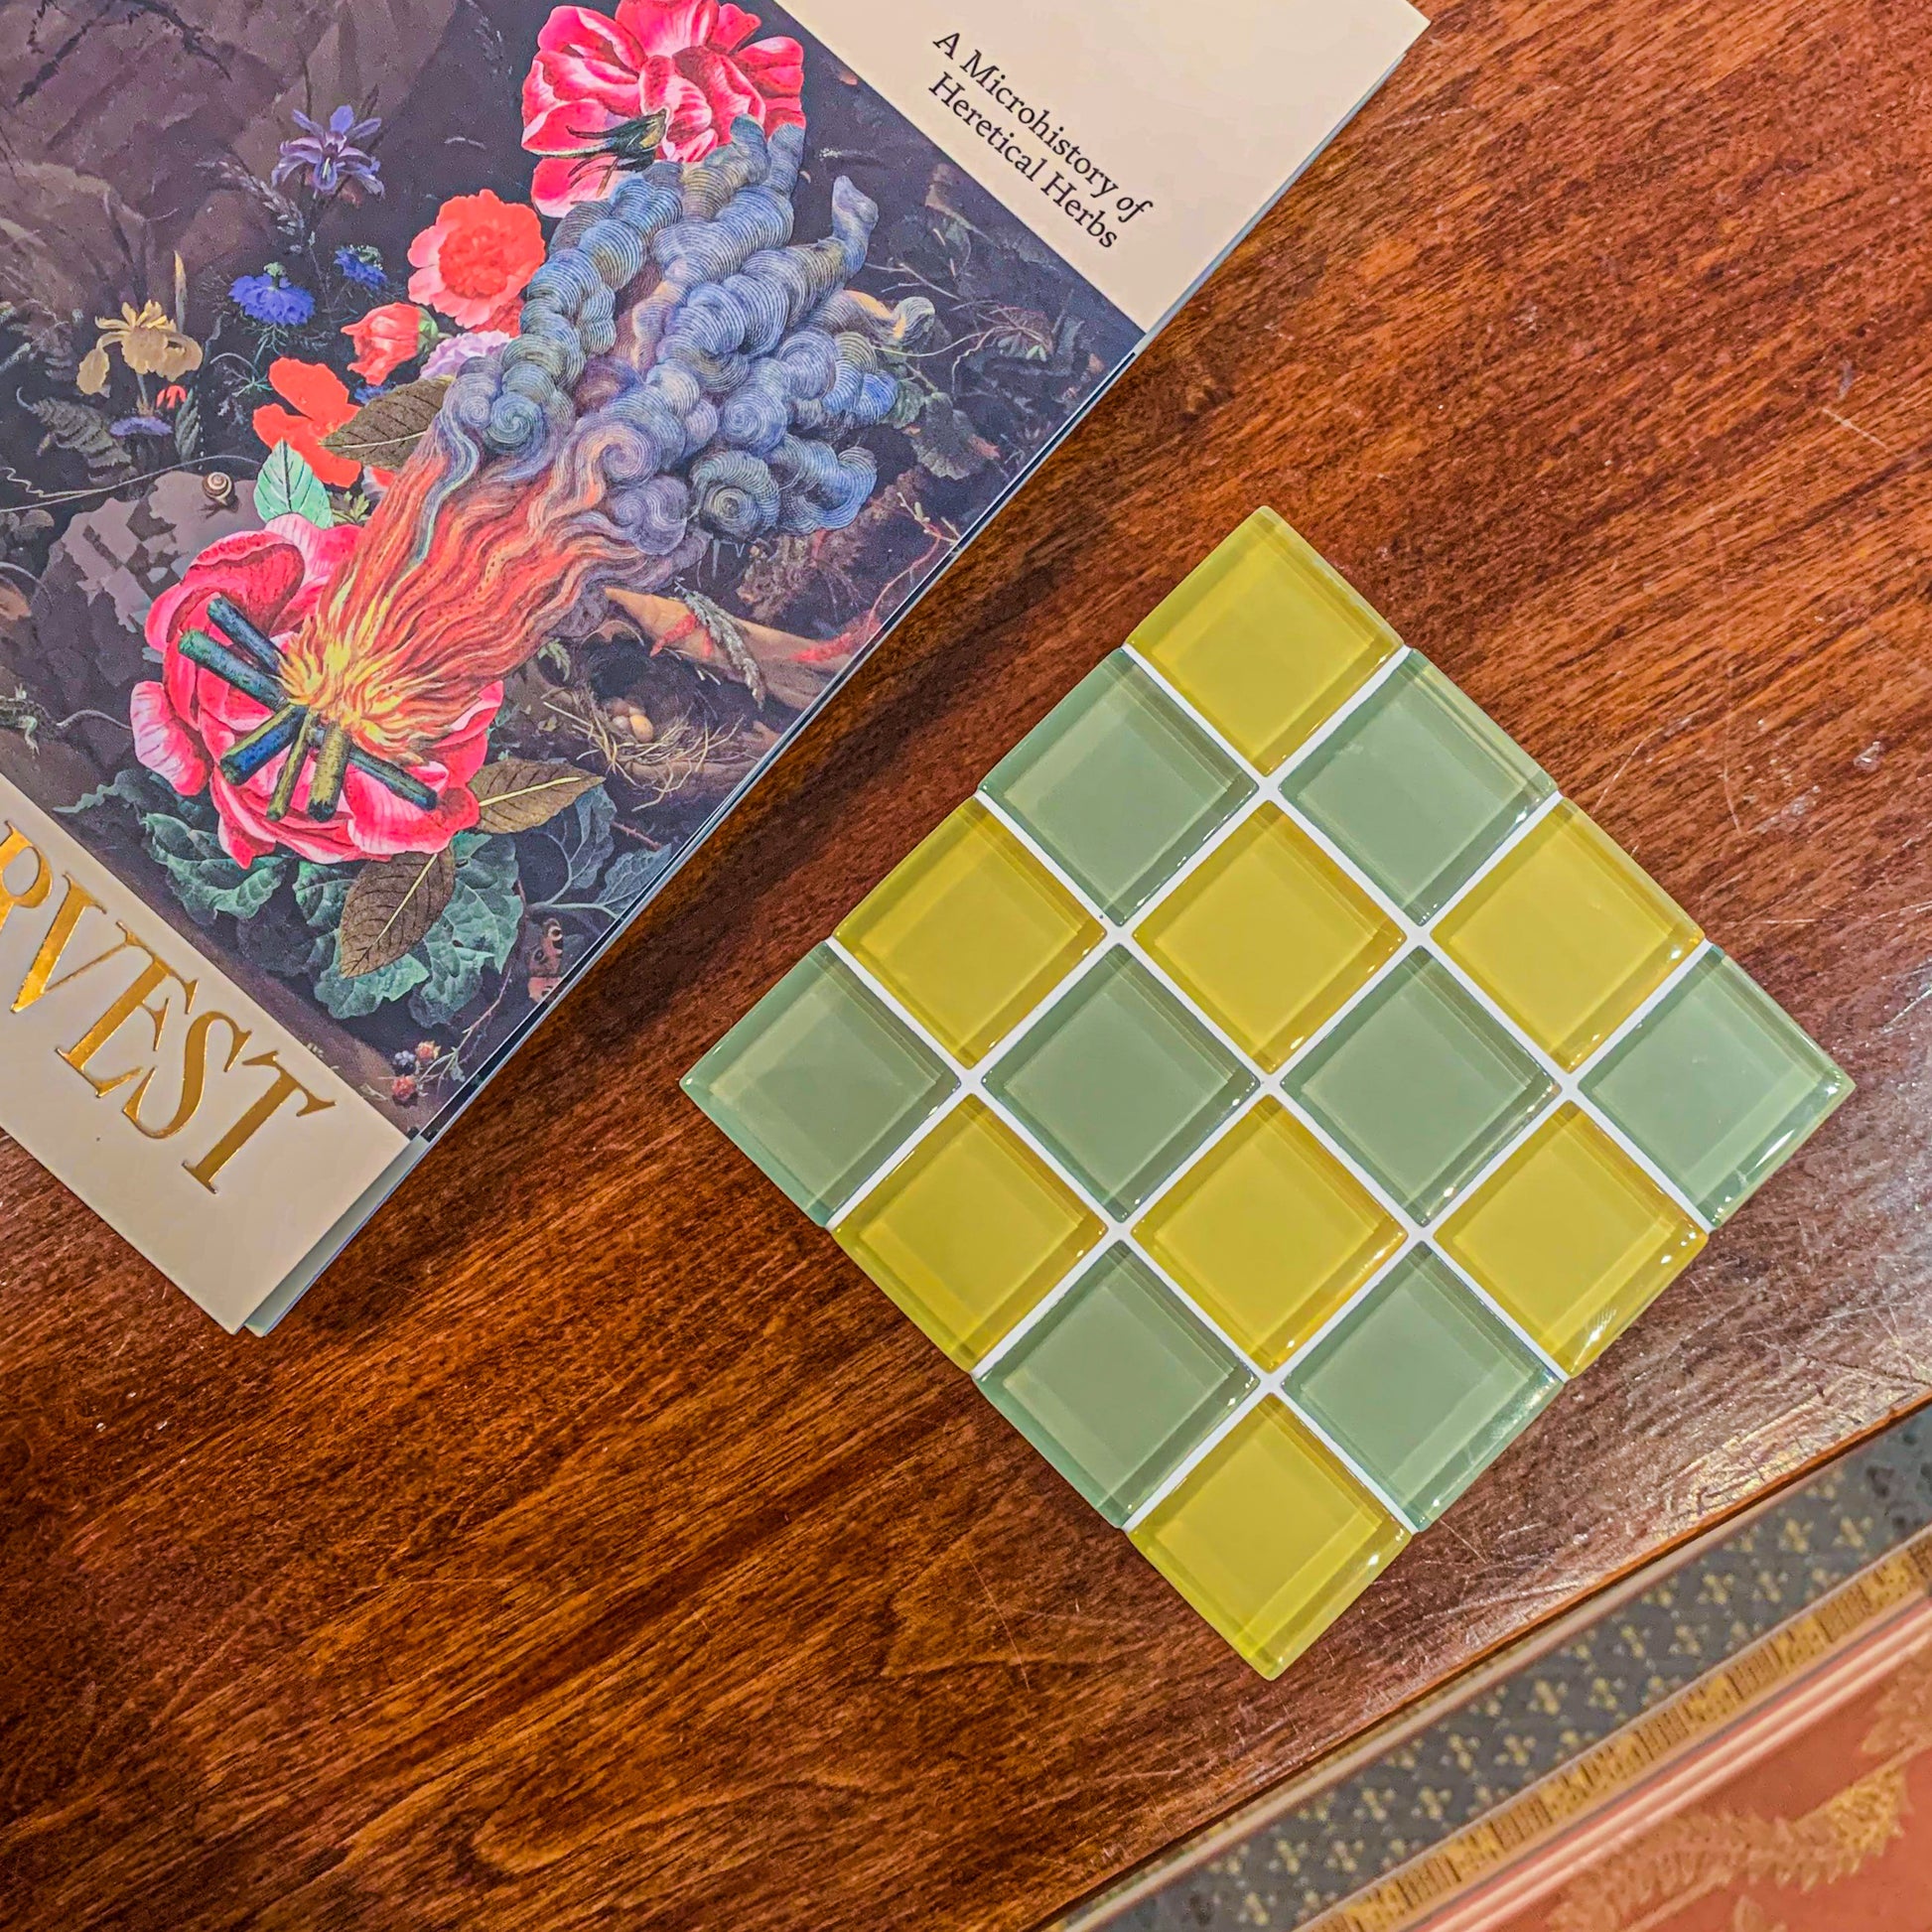 Subtle Art Studios checkered glass tile coaster in sunflowers (olive green and dusty yellow)